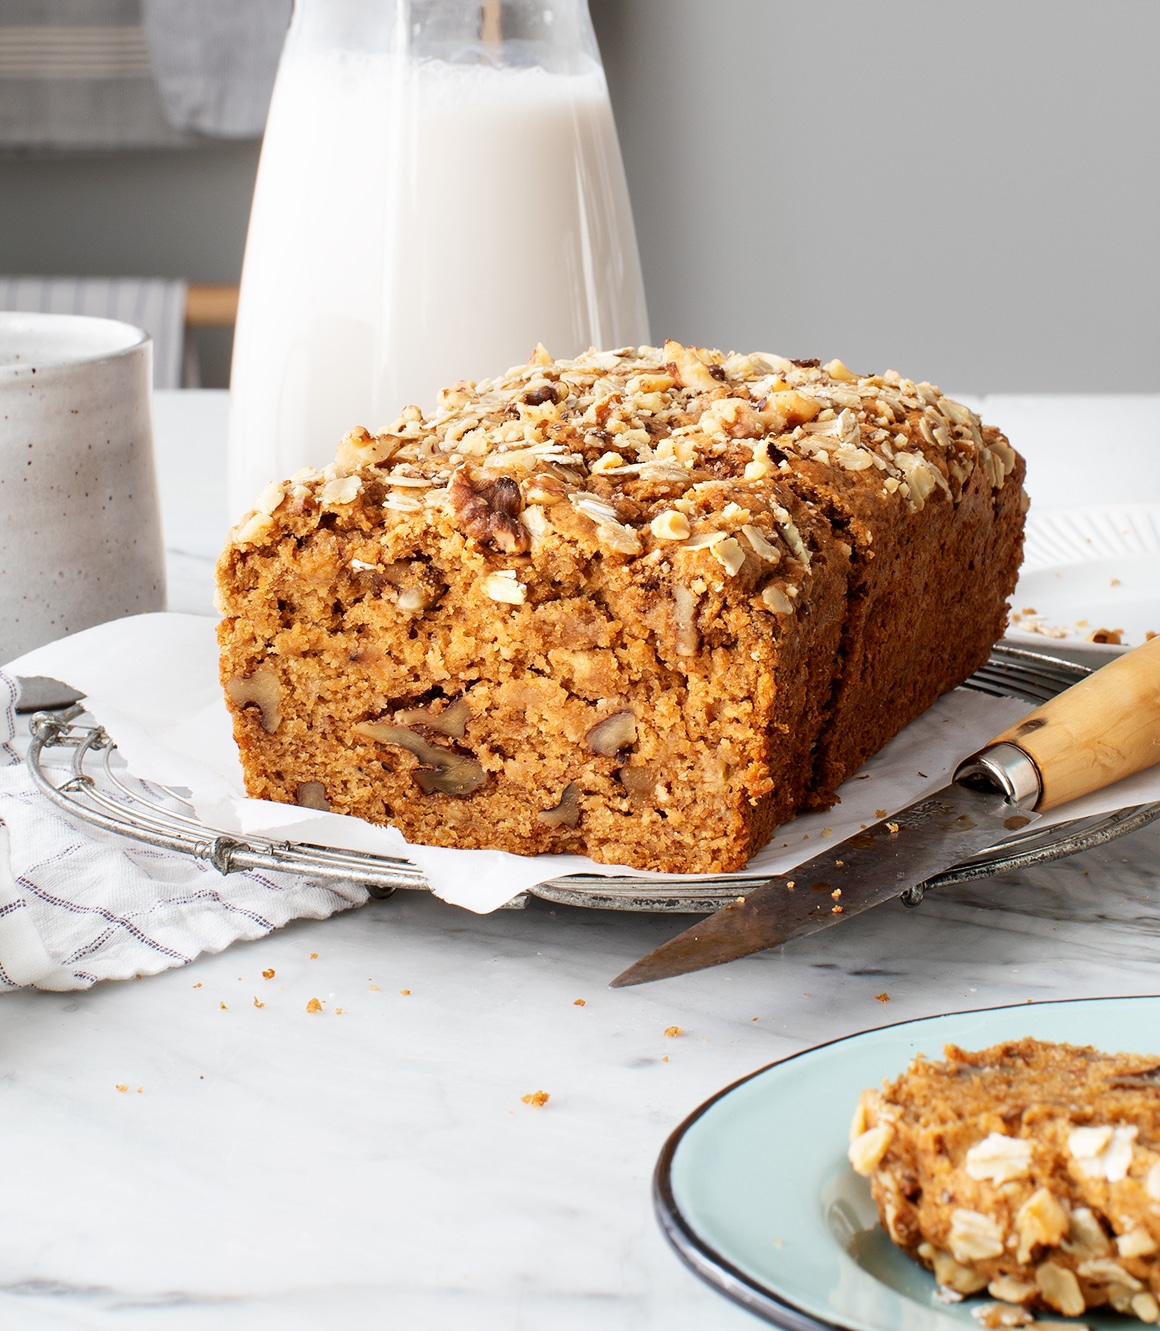 The Banana Bread Food Trend has taken over! Hop on the bandwagon with ...